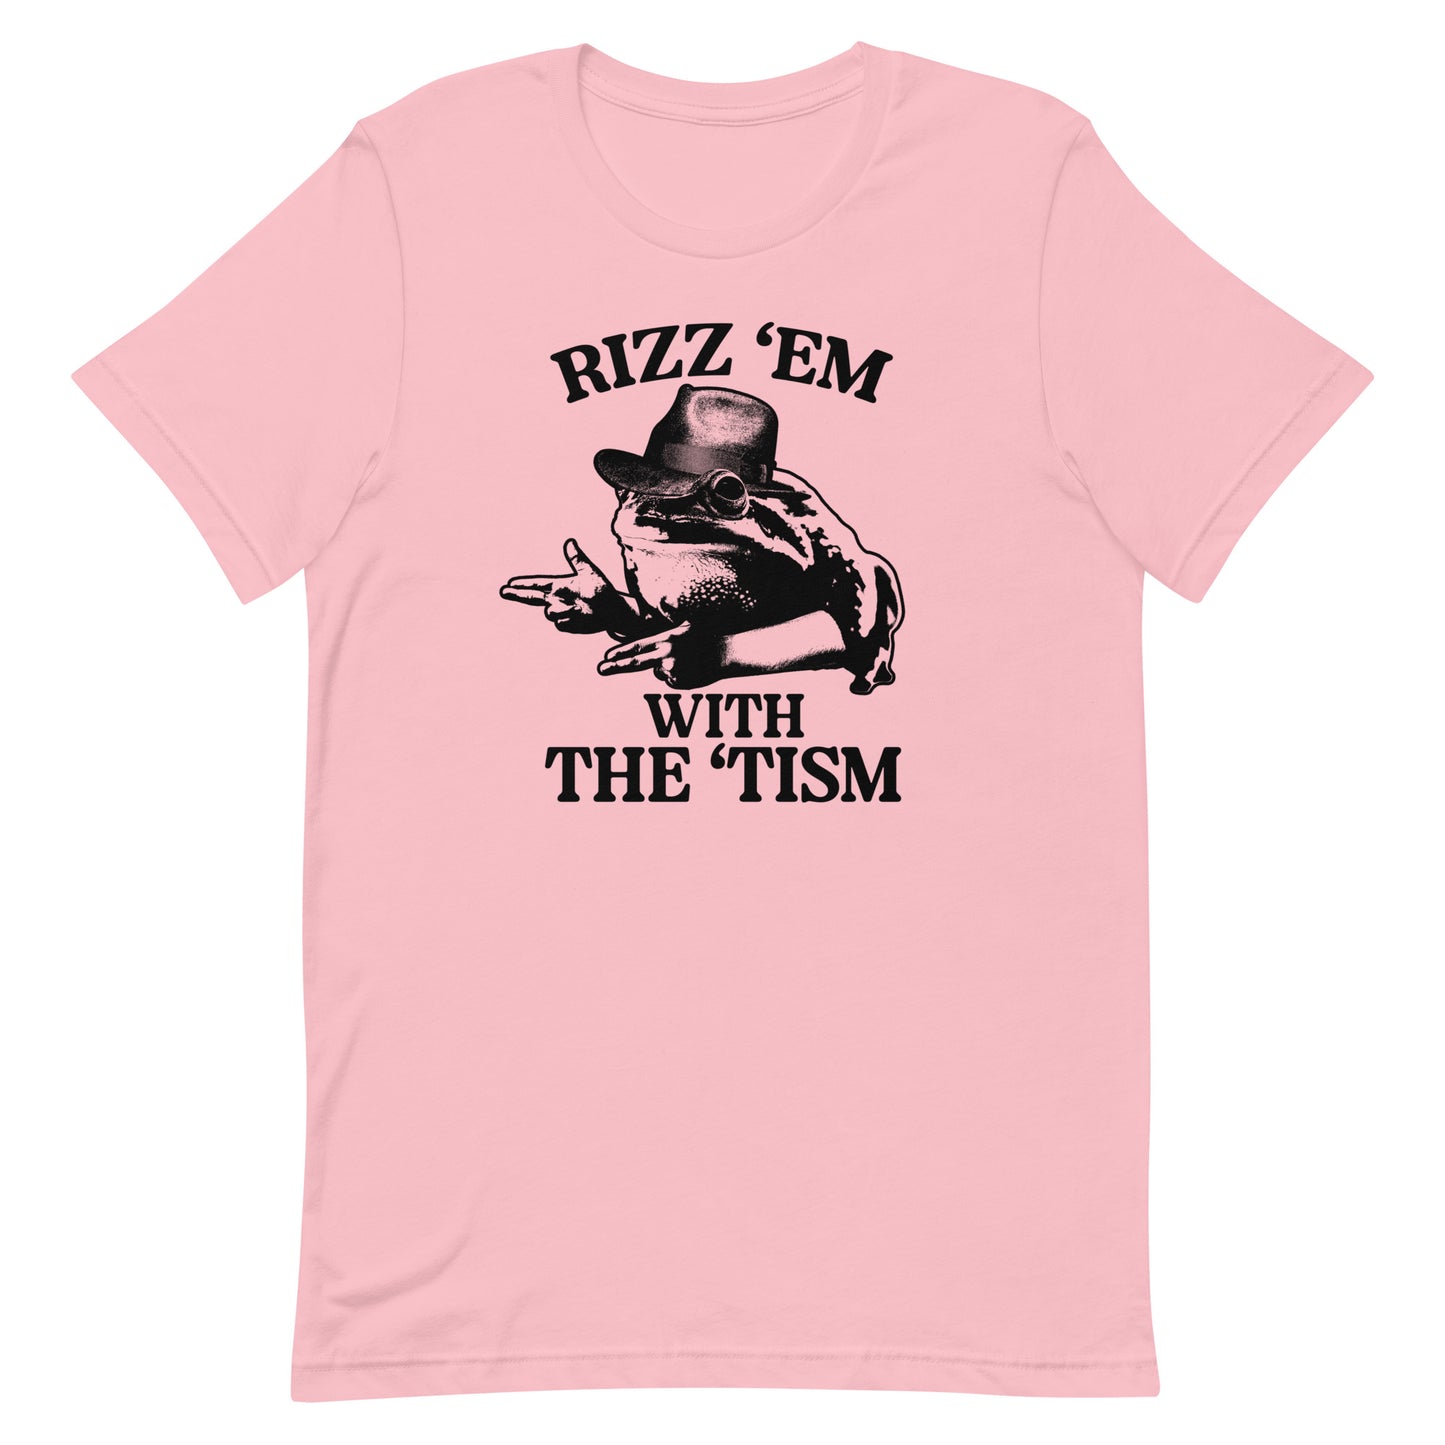 Rizz 'Em With the 'Tism (Frog) Unisex t-shirt